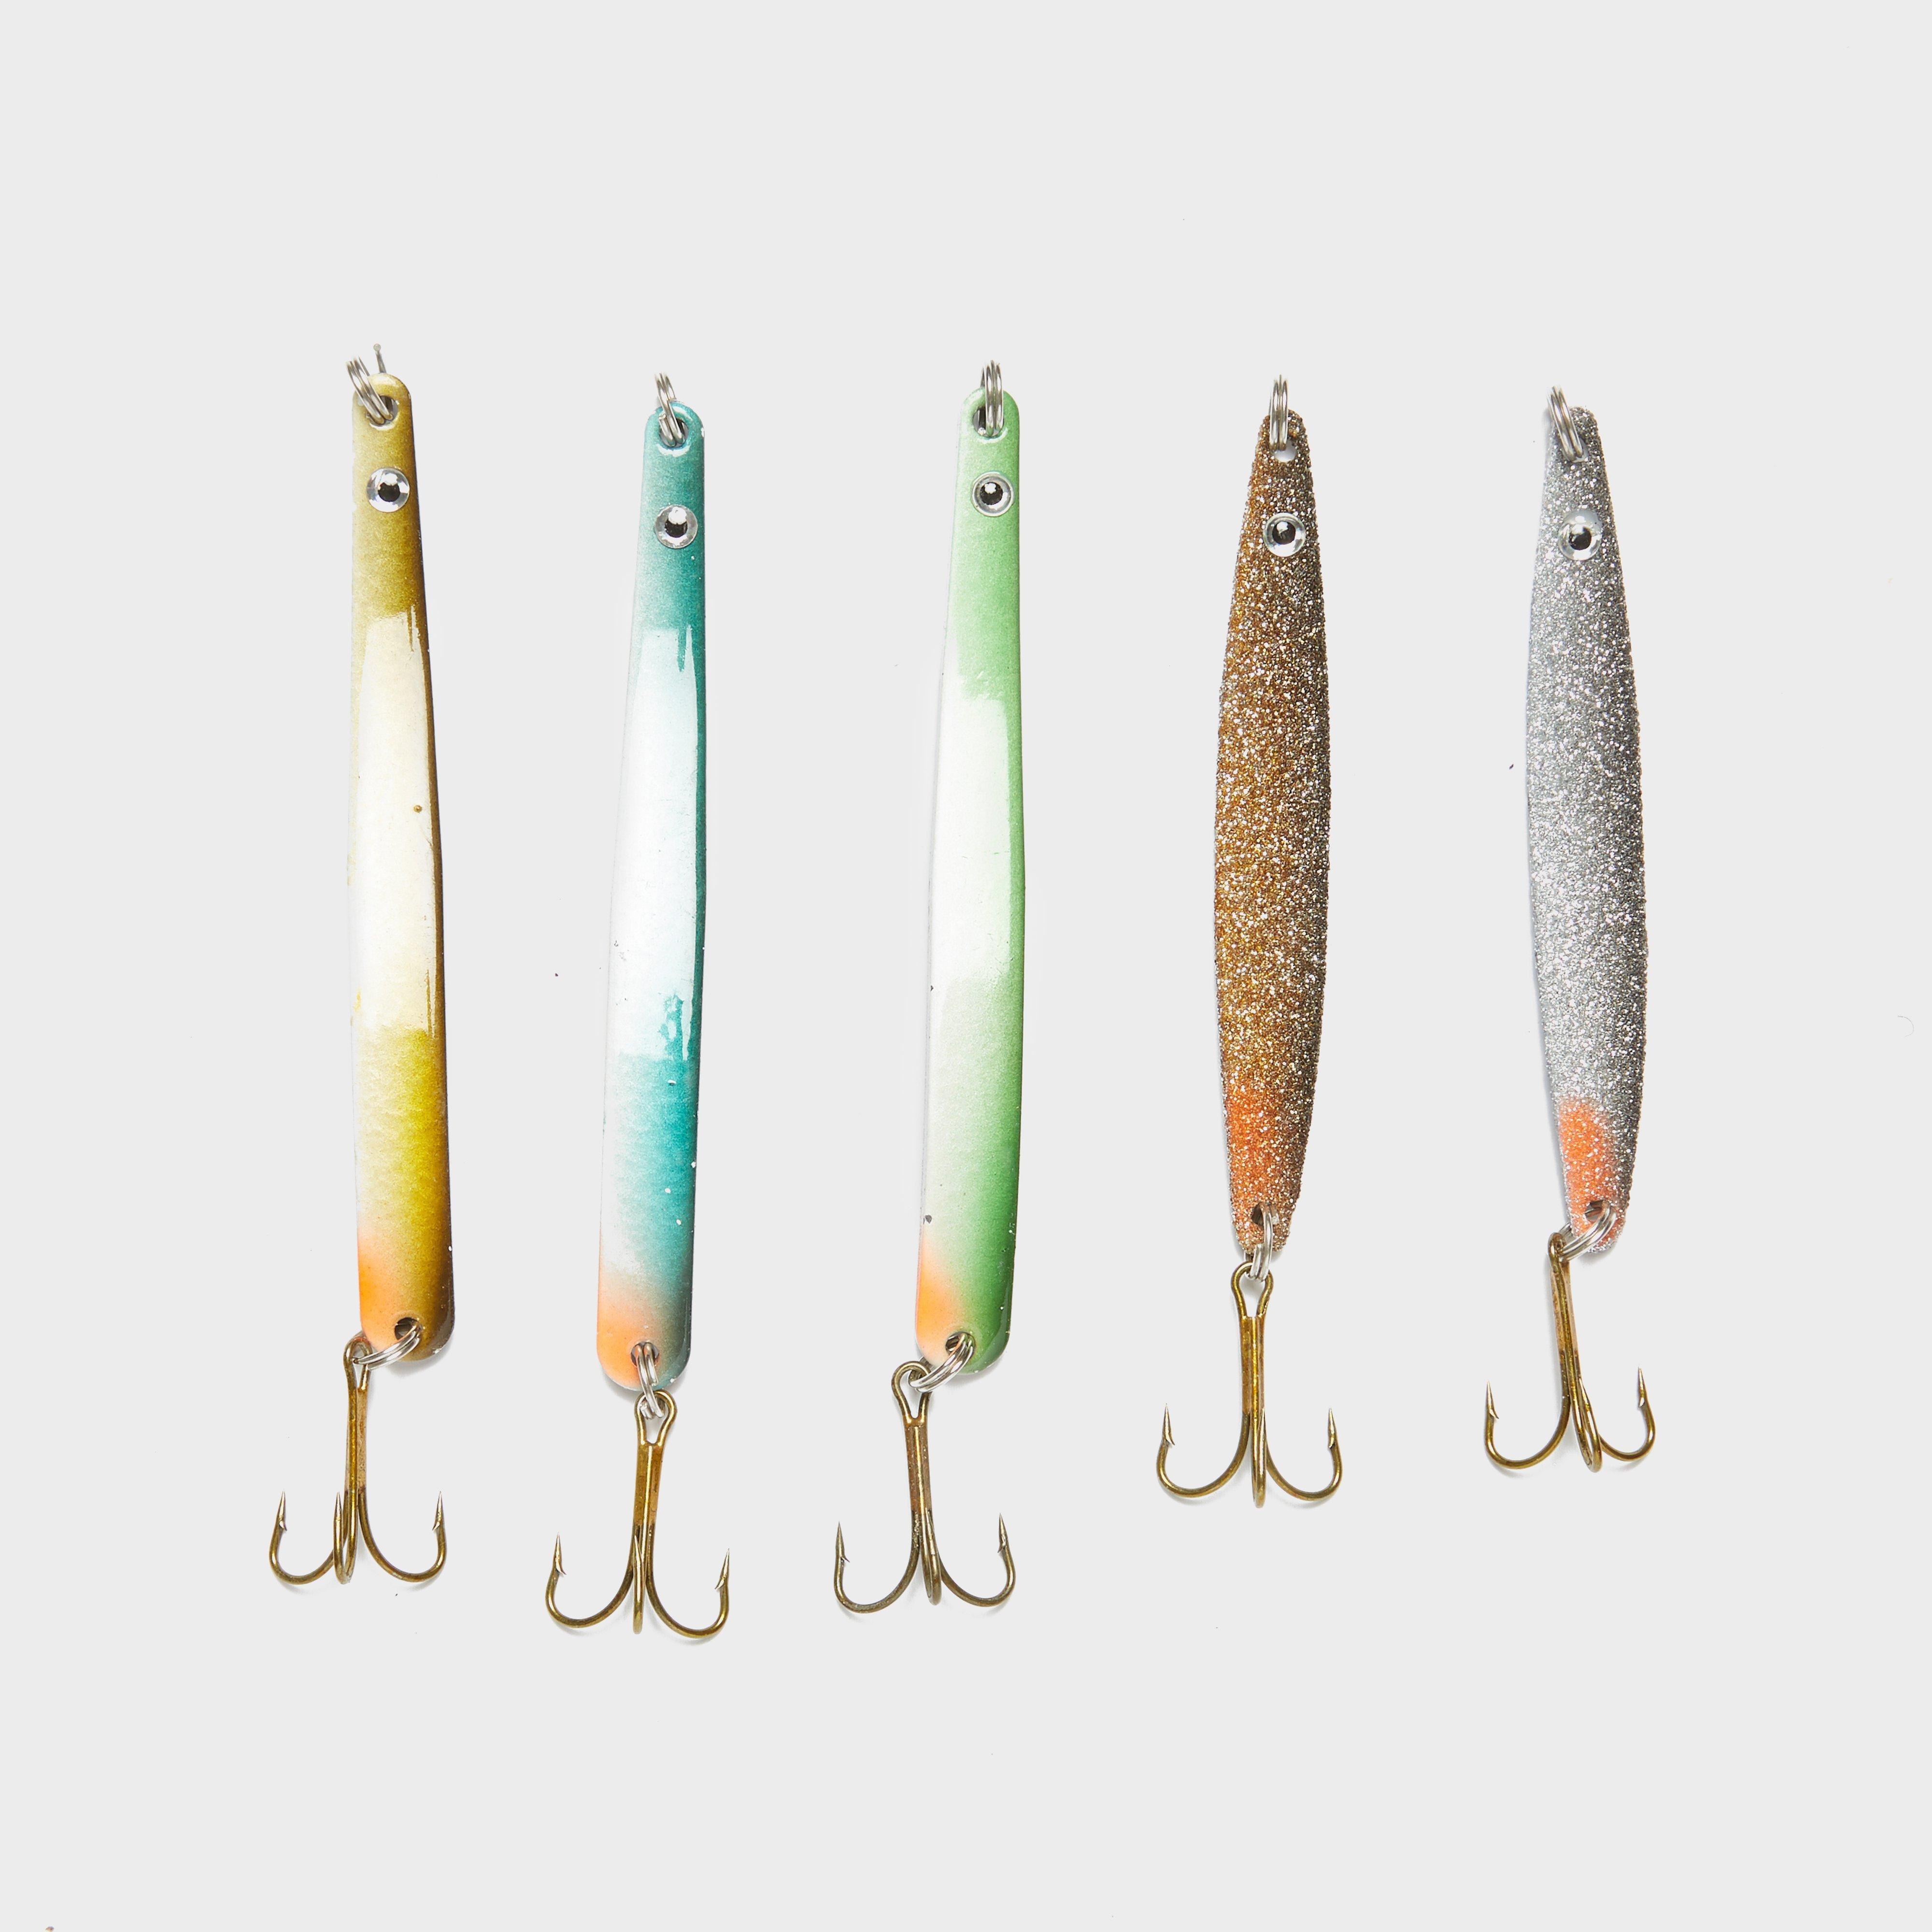 Ron Thompson Sea Trout Lures 24g – 5 Pack Review